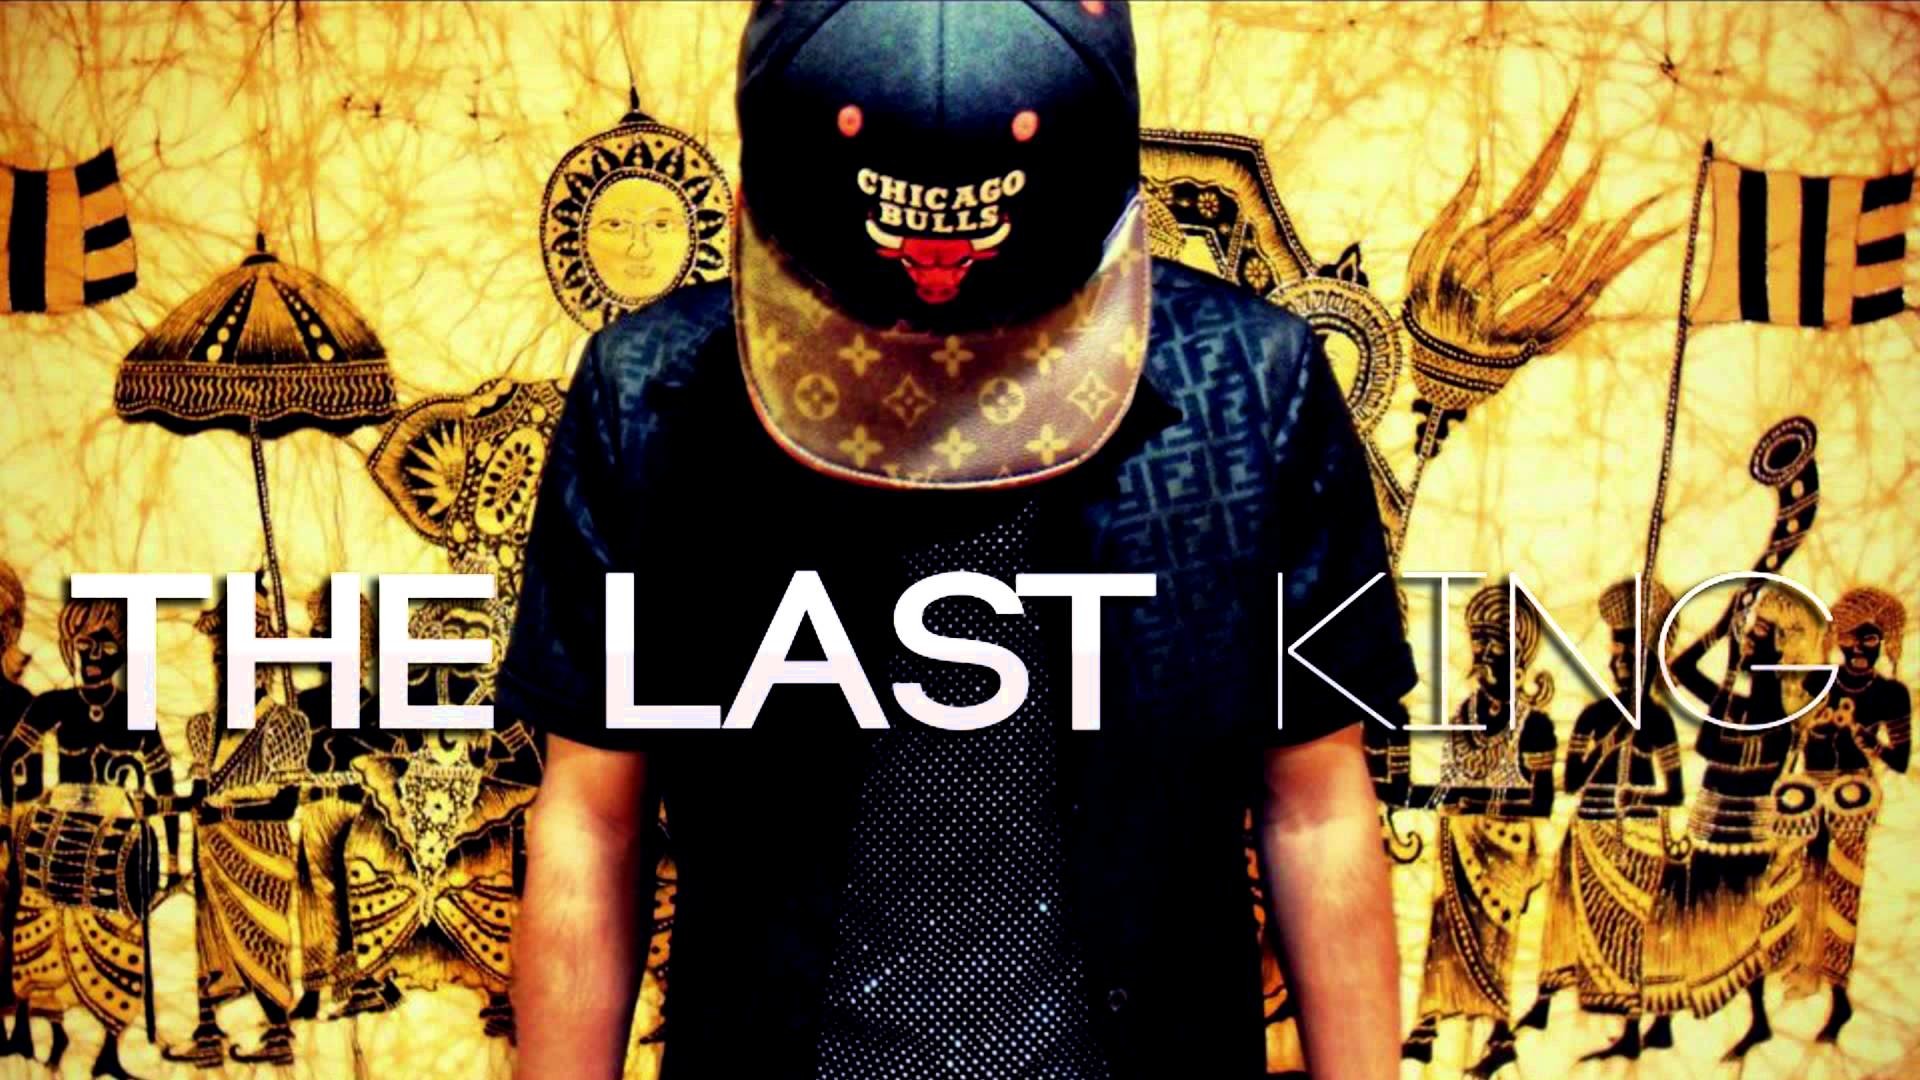 1920x1080 ... Last kings | Quotes | Pinterest | Wallpaper and Dope wallpapers ...